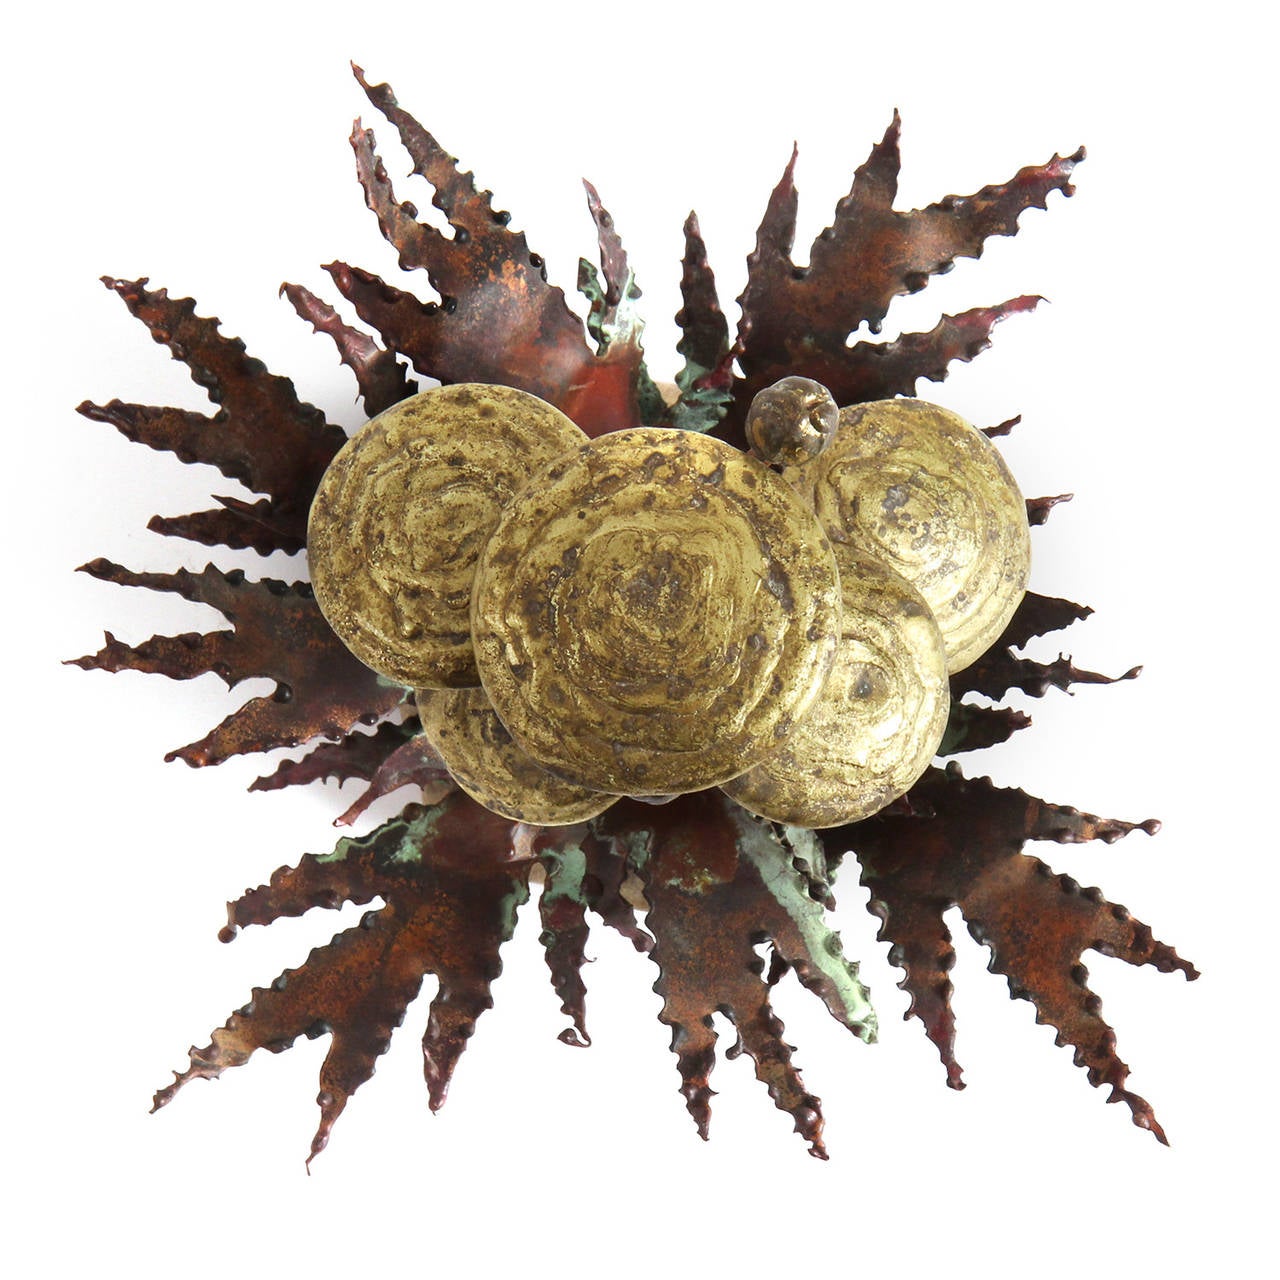 A beautiful and unique hand made metal sculpture depicting mushrooms and dandelion leaves sprouting from a stone base and having a rich variegated patina.